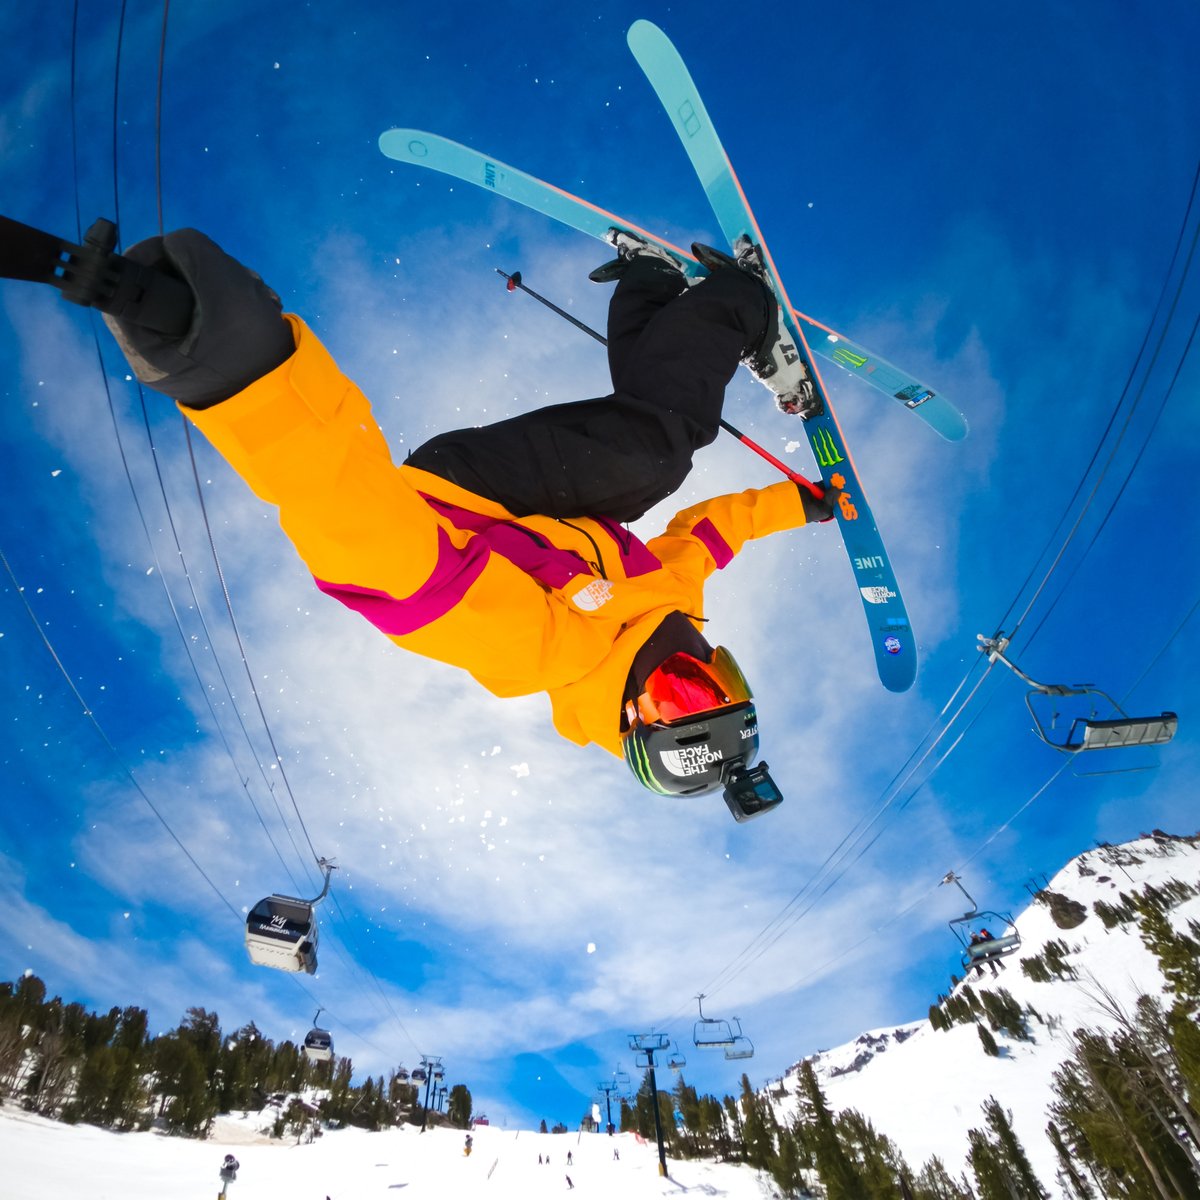 Flash sale 🏷 For a limited time, #GoProHERO9 Black is just $199 📷 Check out the most affordable camera in our lineup at GoPro.com/shop/cameras/h…

⛷ #GoProAthlete @TWallisch at @MammothMountain

#GoPro #GoProSnow #GoProSelfie #MammothMountain